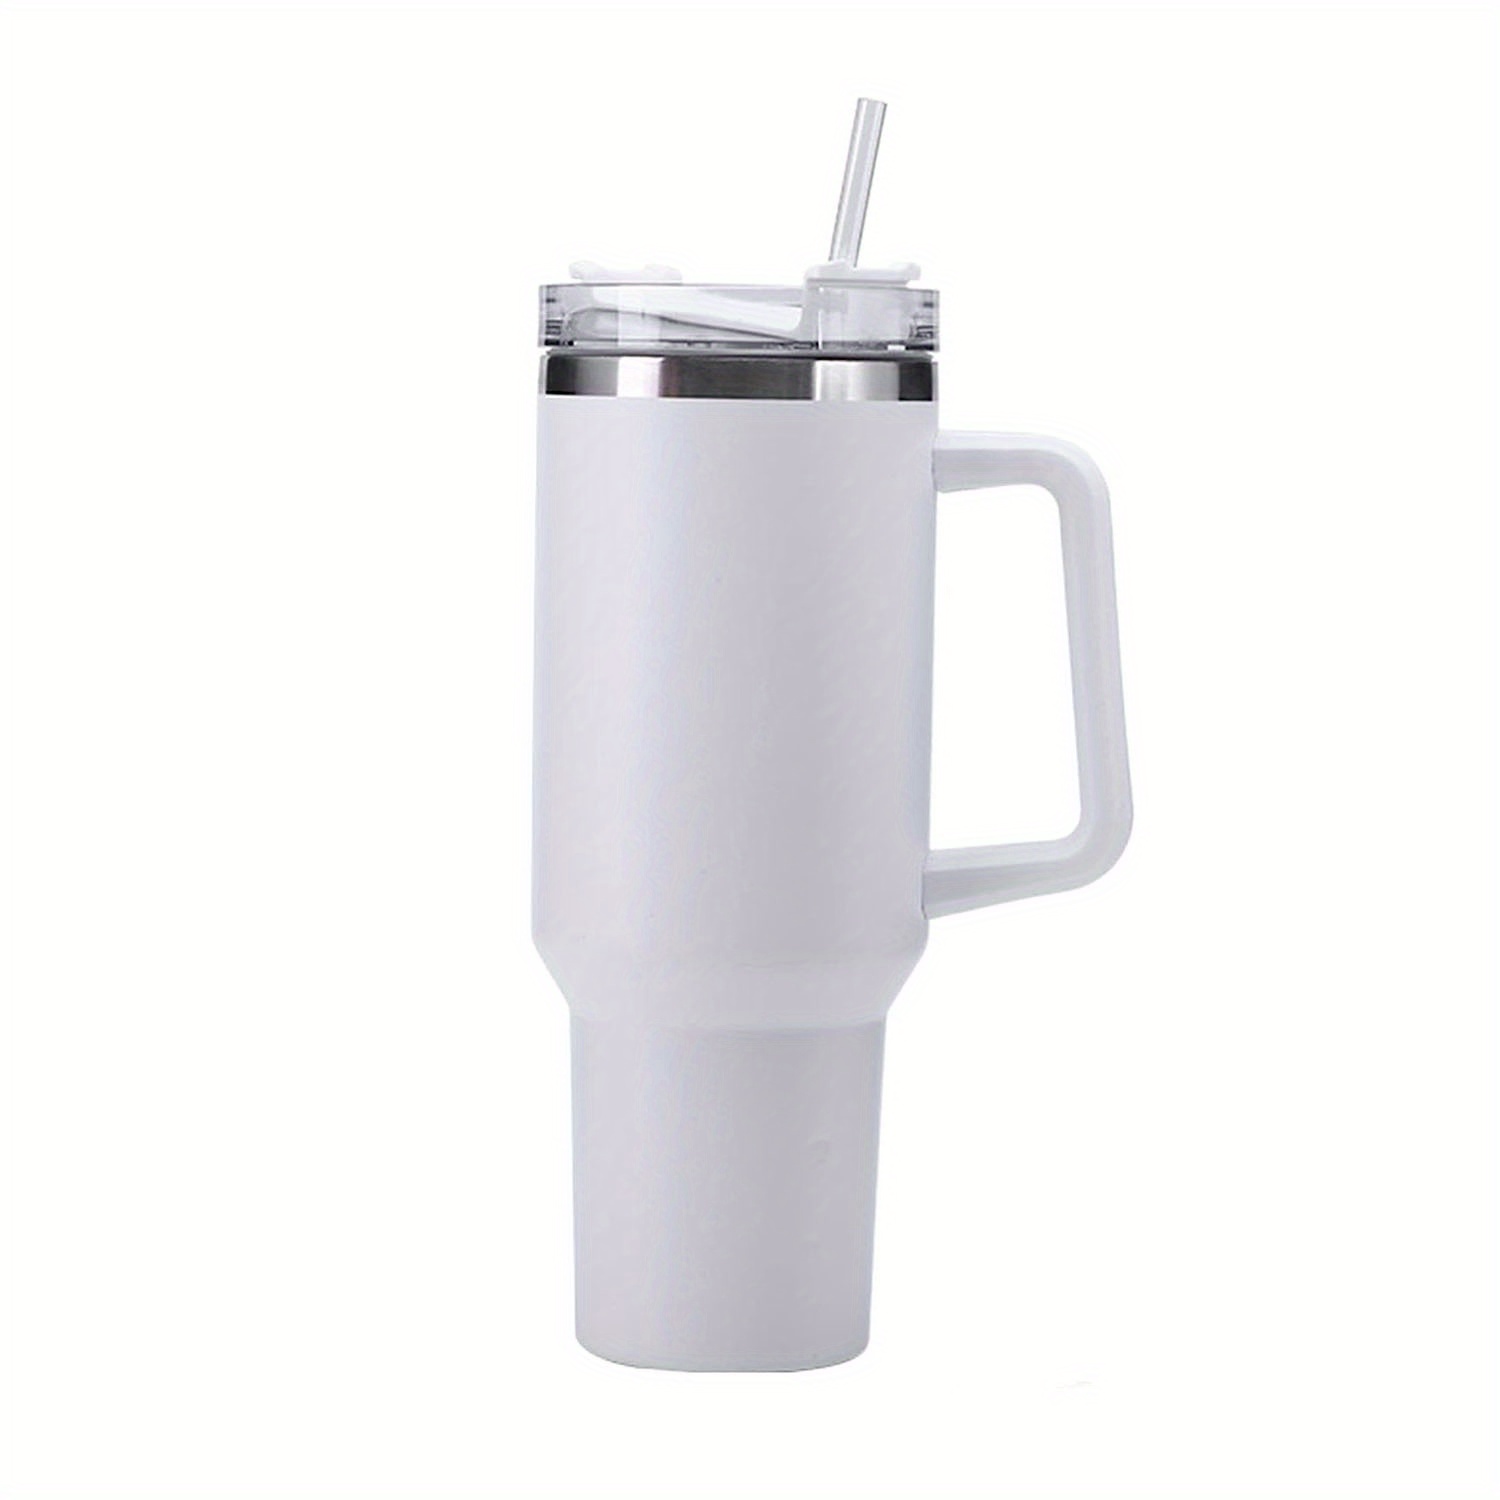 30oz Double Layer Stainless Steel Tumbler Reusable Vacuum